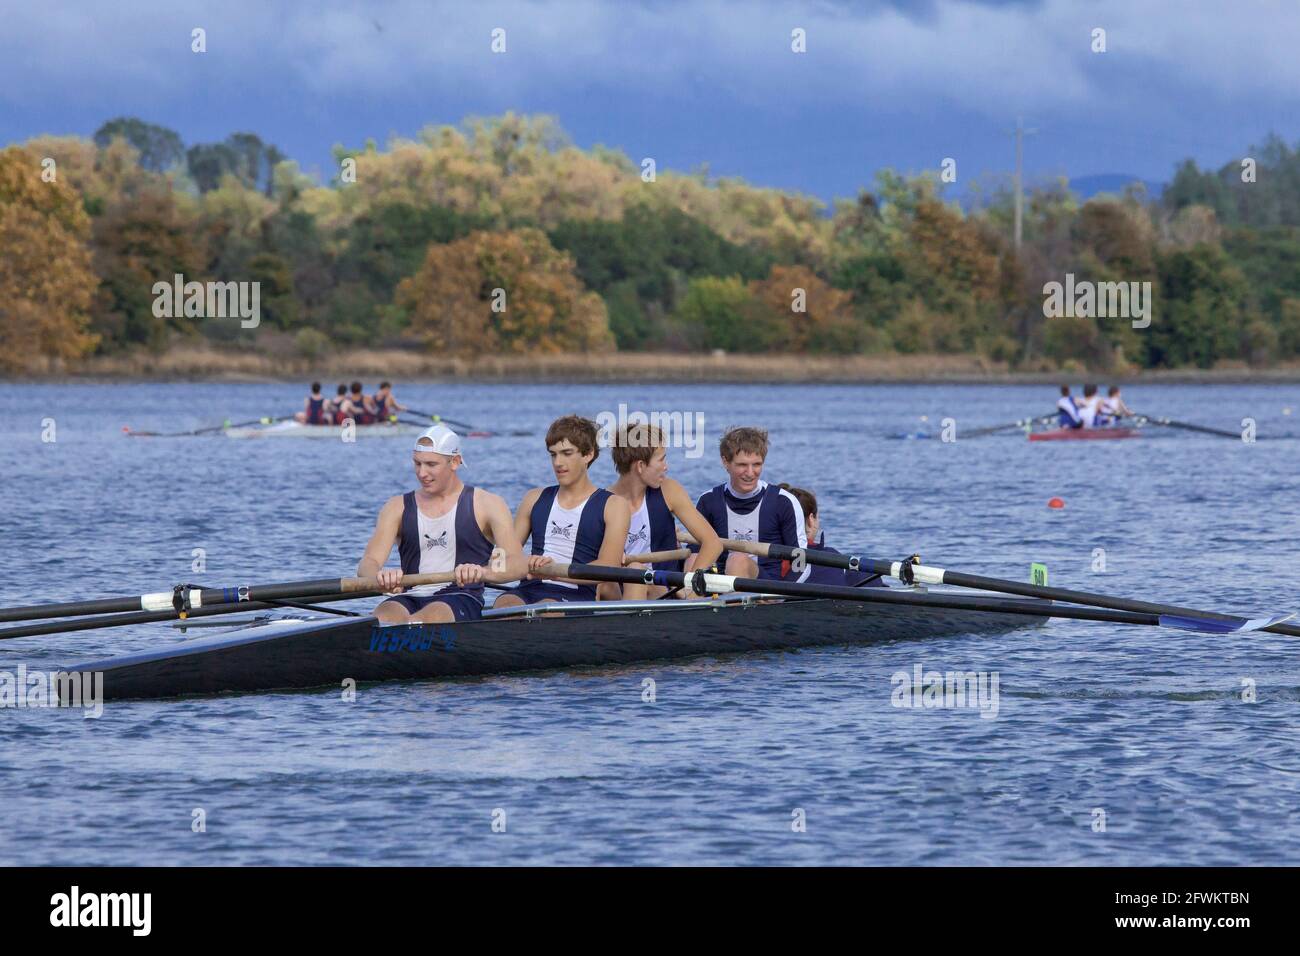 High School Coxed Quad Rowing Team Relaxing After the Race in Northern California Stock Photo